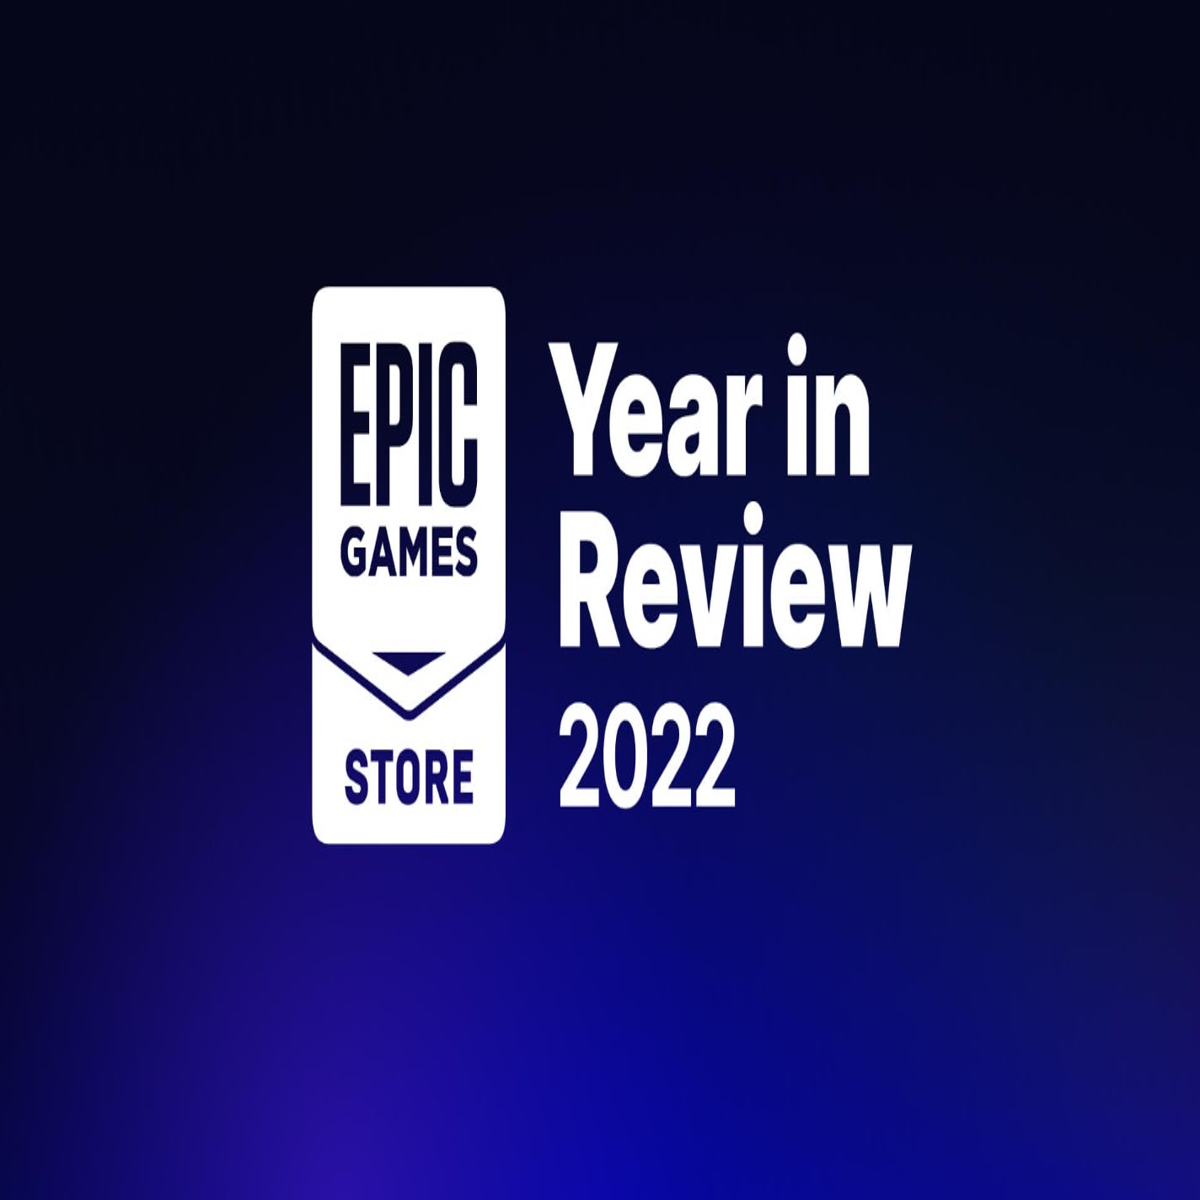 Epic First Run launches today, and introducing the Now On Epic program -  Epic Games Store